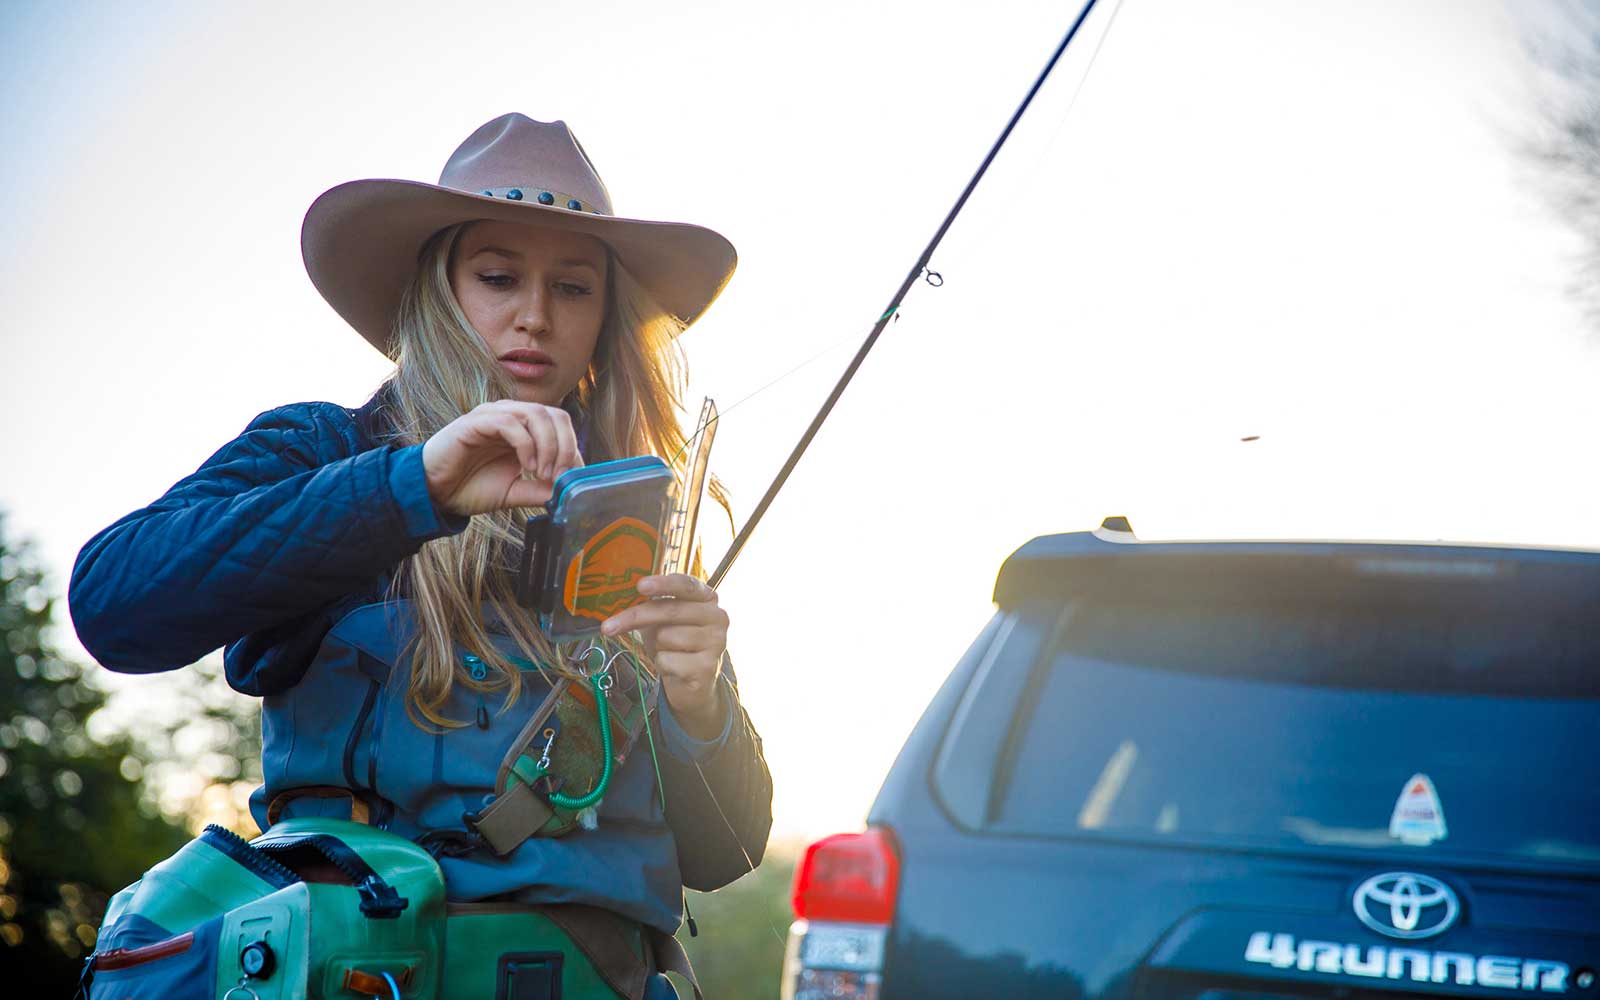 Morgan "Mo" Prater prepares her rod for winter fly fishing in the Lower Mountain Fork River, Beavers Bend Oklahoma